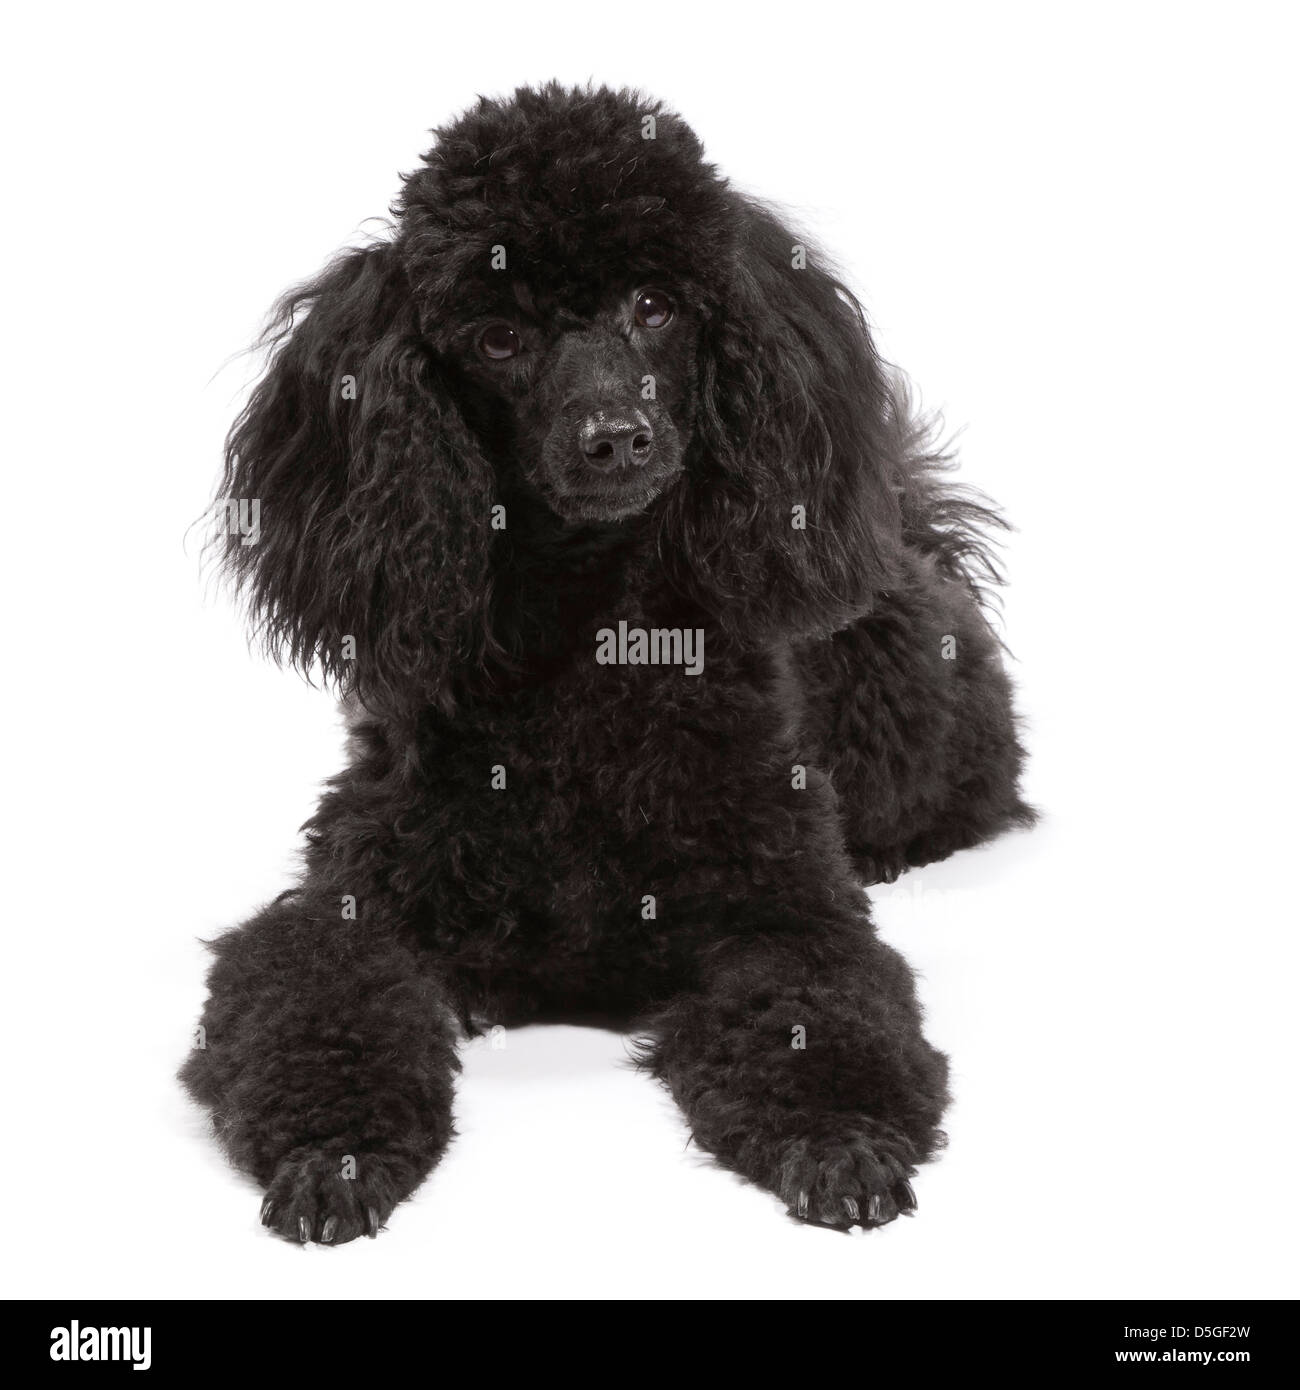 Toy Miniature Cross Poodle aged 15 months Stock Photo